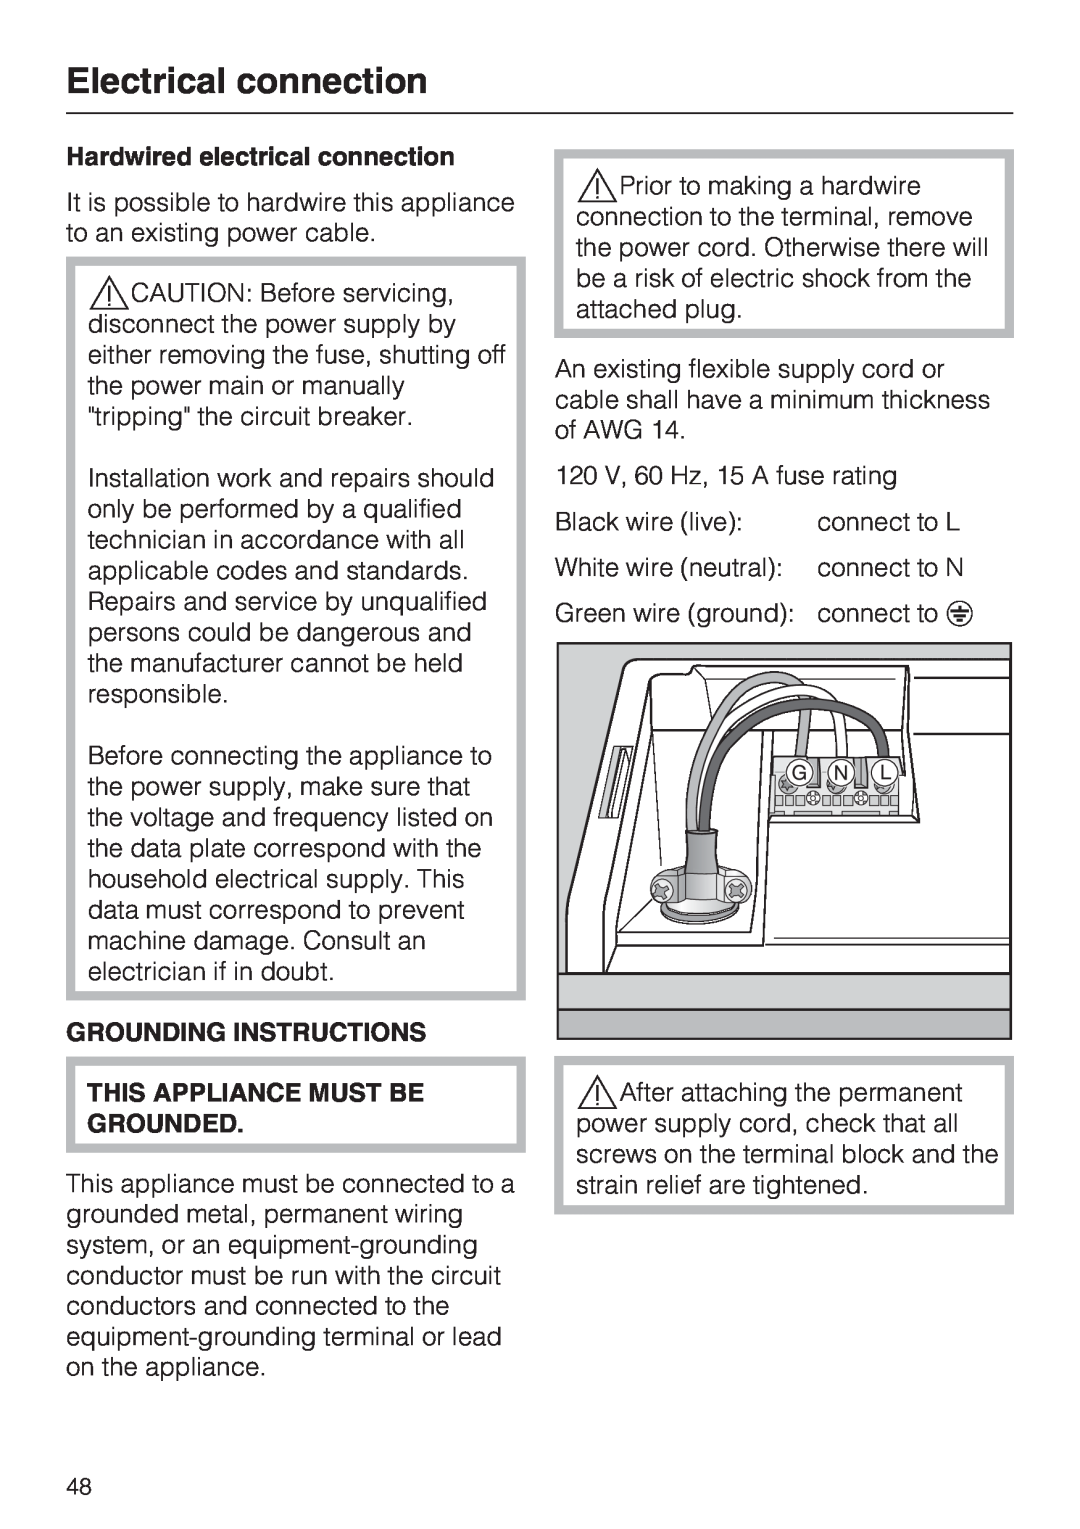 Miele G 4205 operating instructions Electrical connection, Hardwired electrical connection, Grounding Instructions 